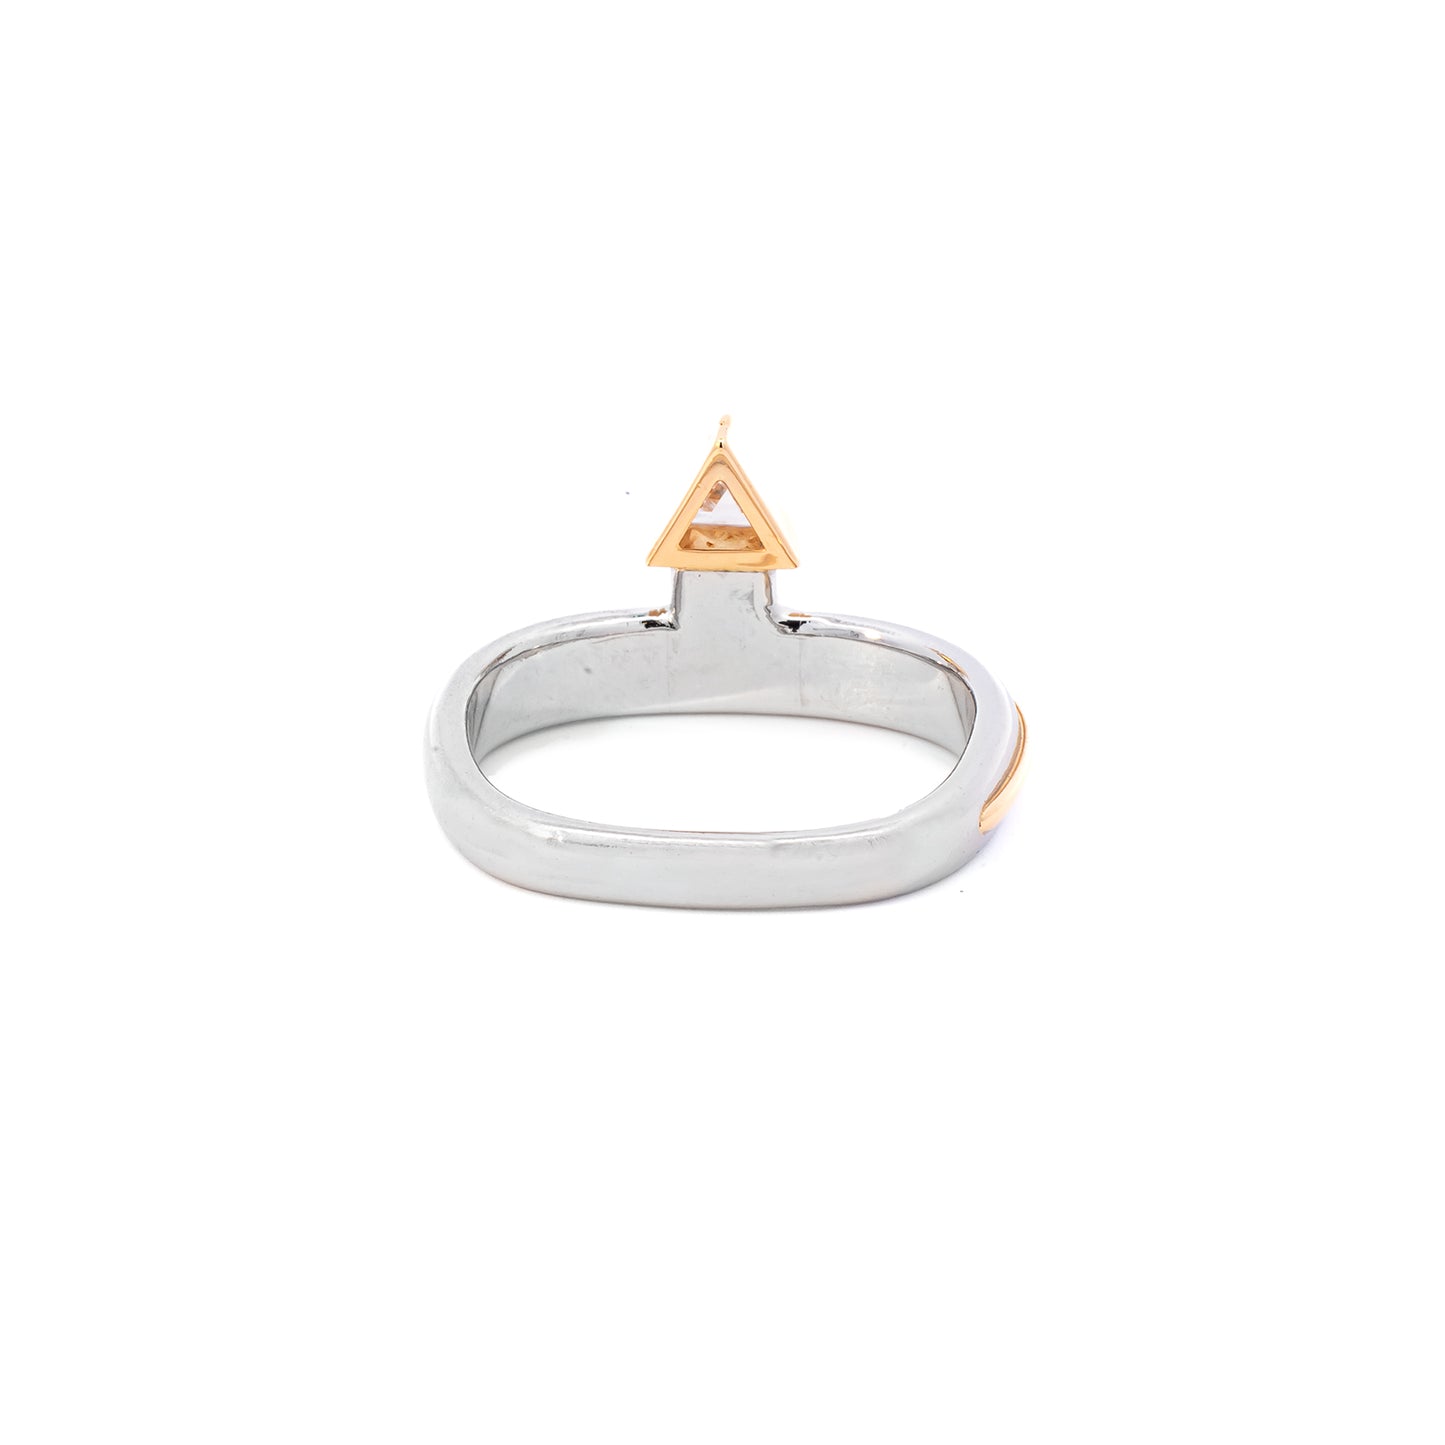 Diamond ring square solitaire ring white gold 585 gold 14K with diamond wedding rings